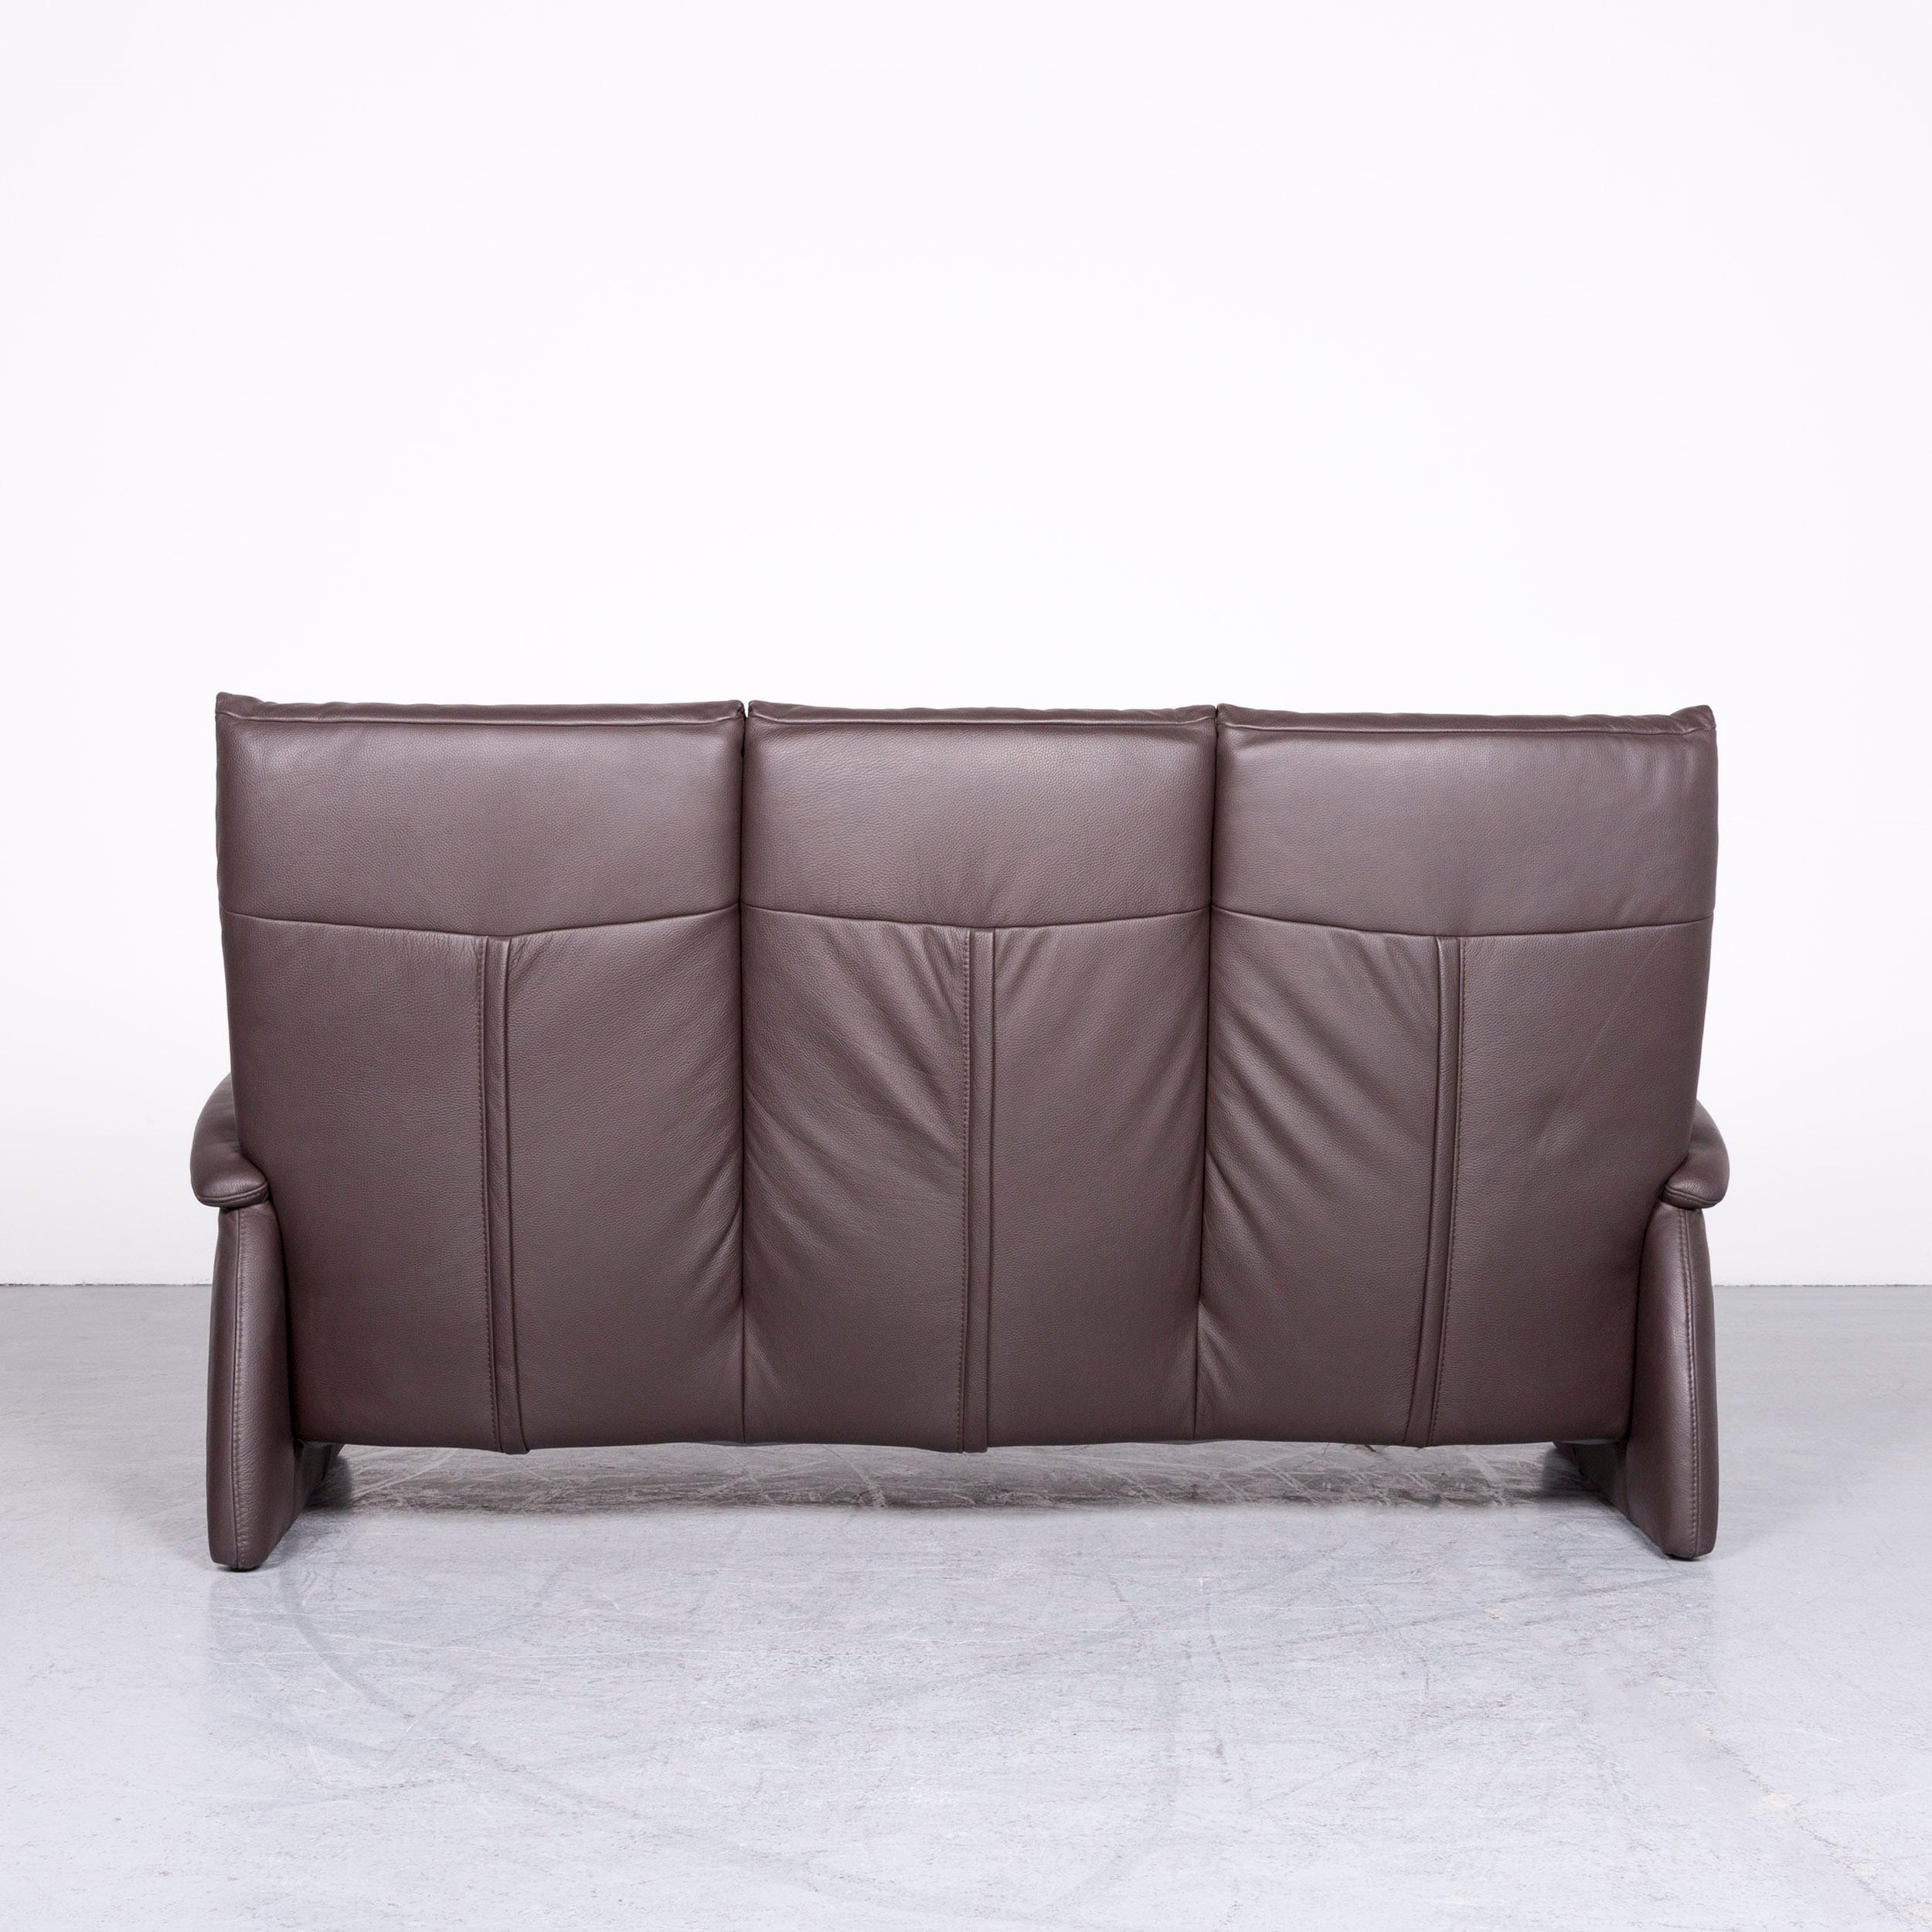 Himolla Designer Sofa Brown Leather Three-Seat Couch 3